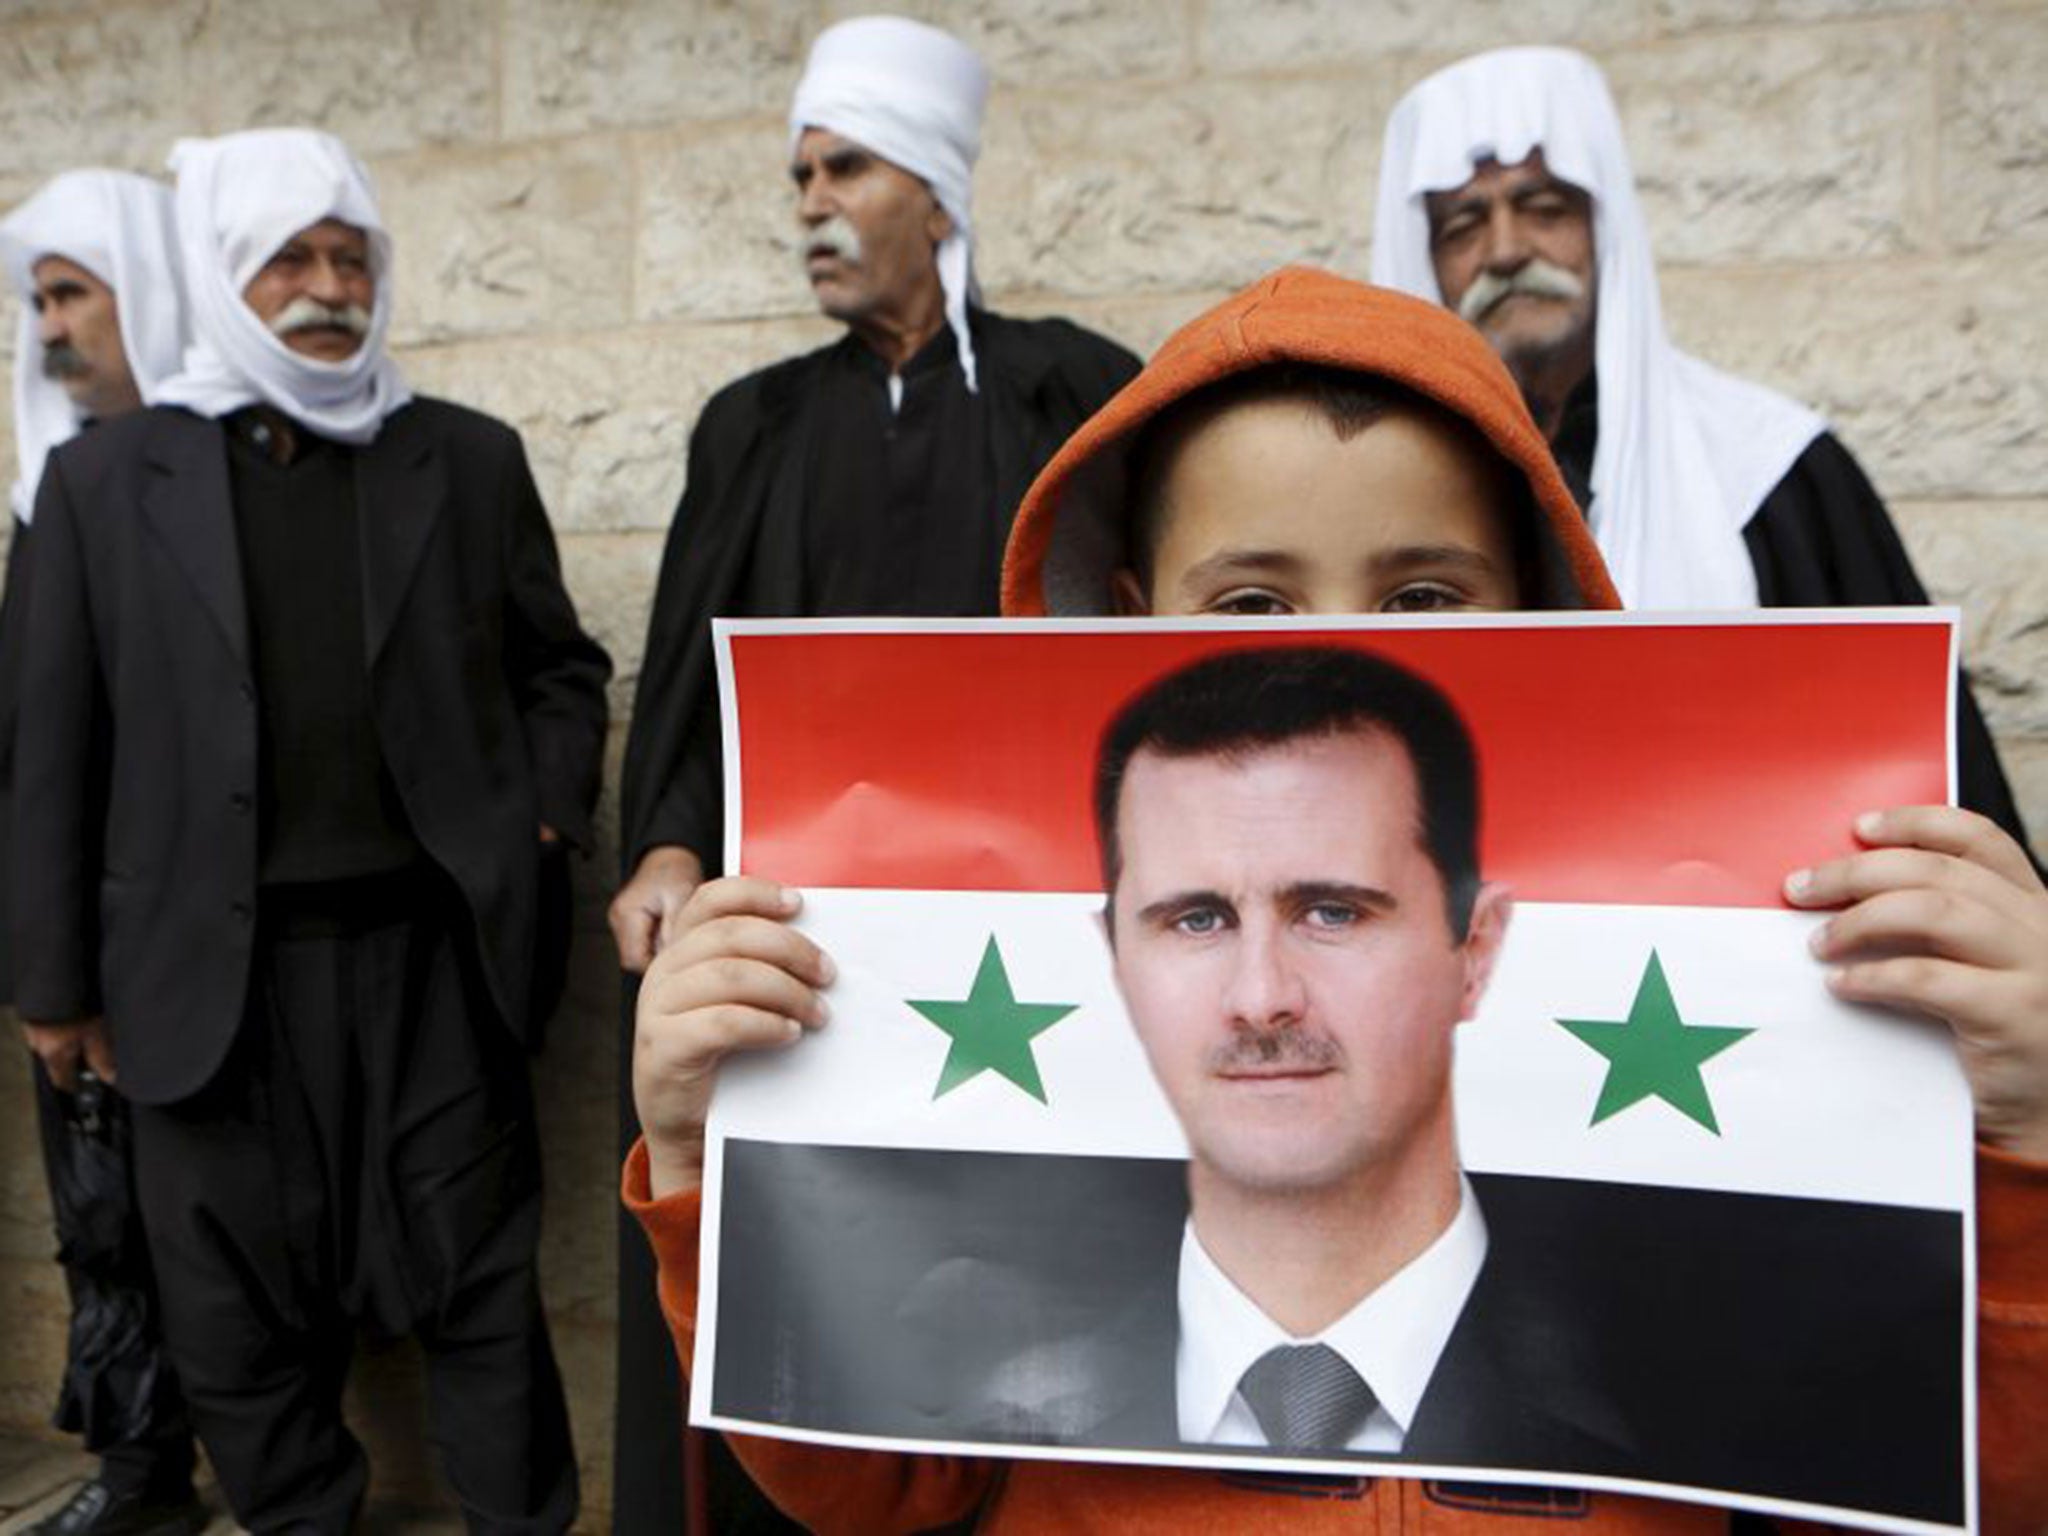 A boy from the Druze community, threatened by militants, holding a Syrian flag with the image of Bashar al-Assad during a rally marking Independence Day in a village on the Golan Heights